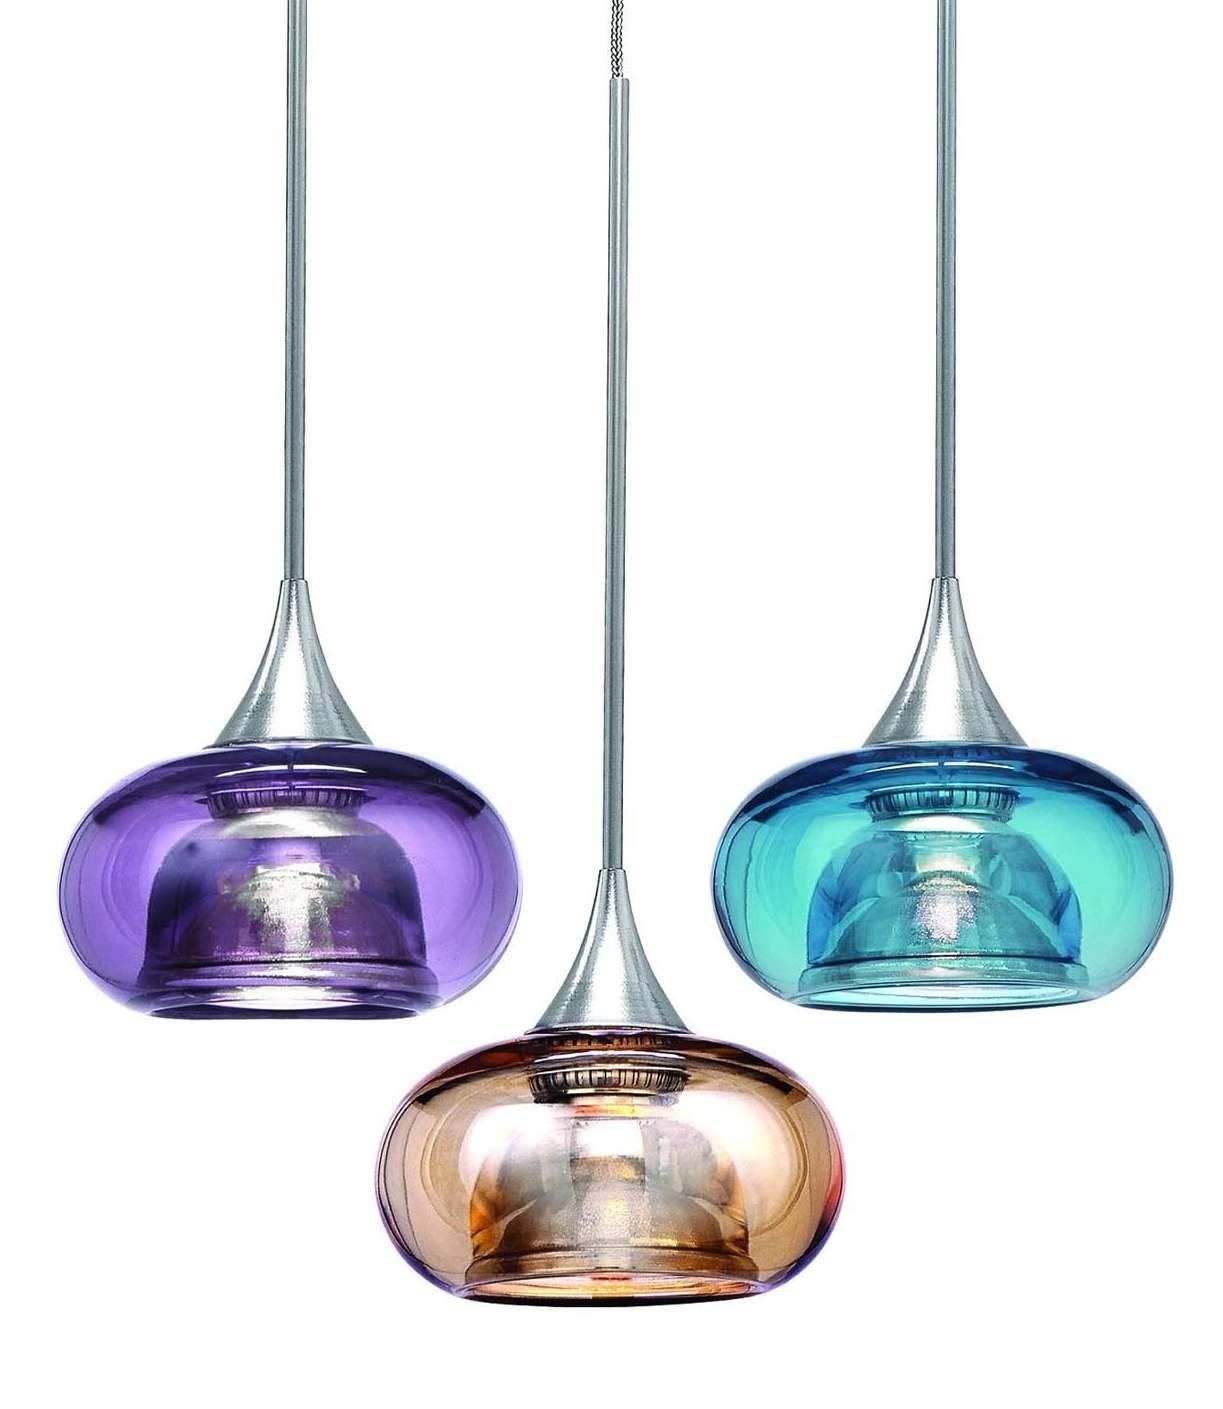 Inspirational Replacement Pendant Light Shades 51 With Additional With Pull Down Pendants (View 14 of 15)